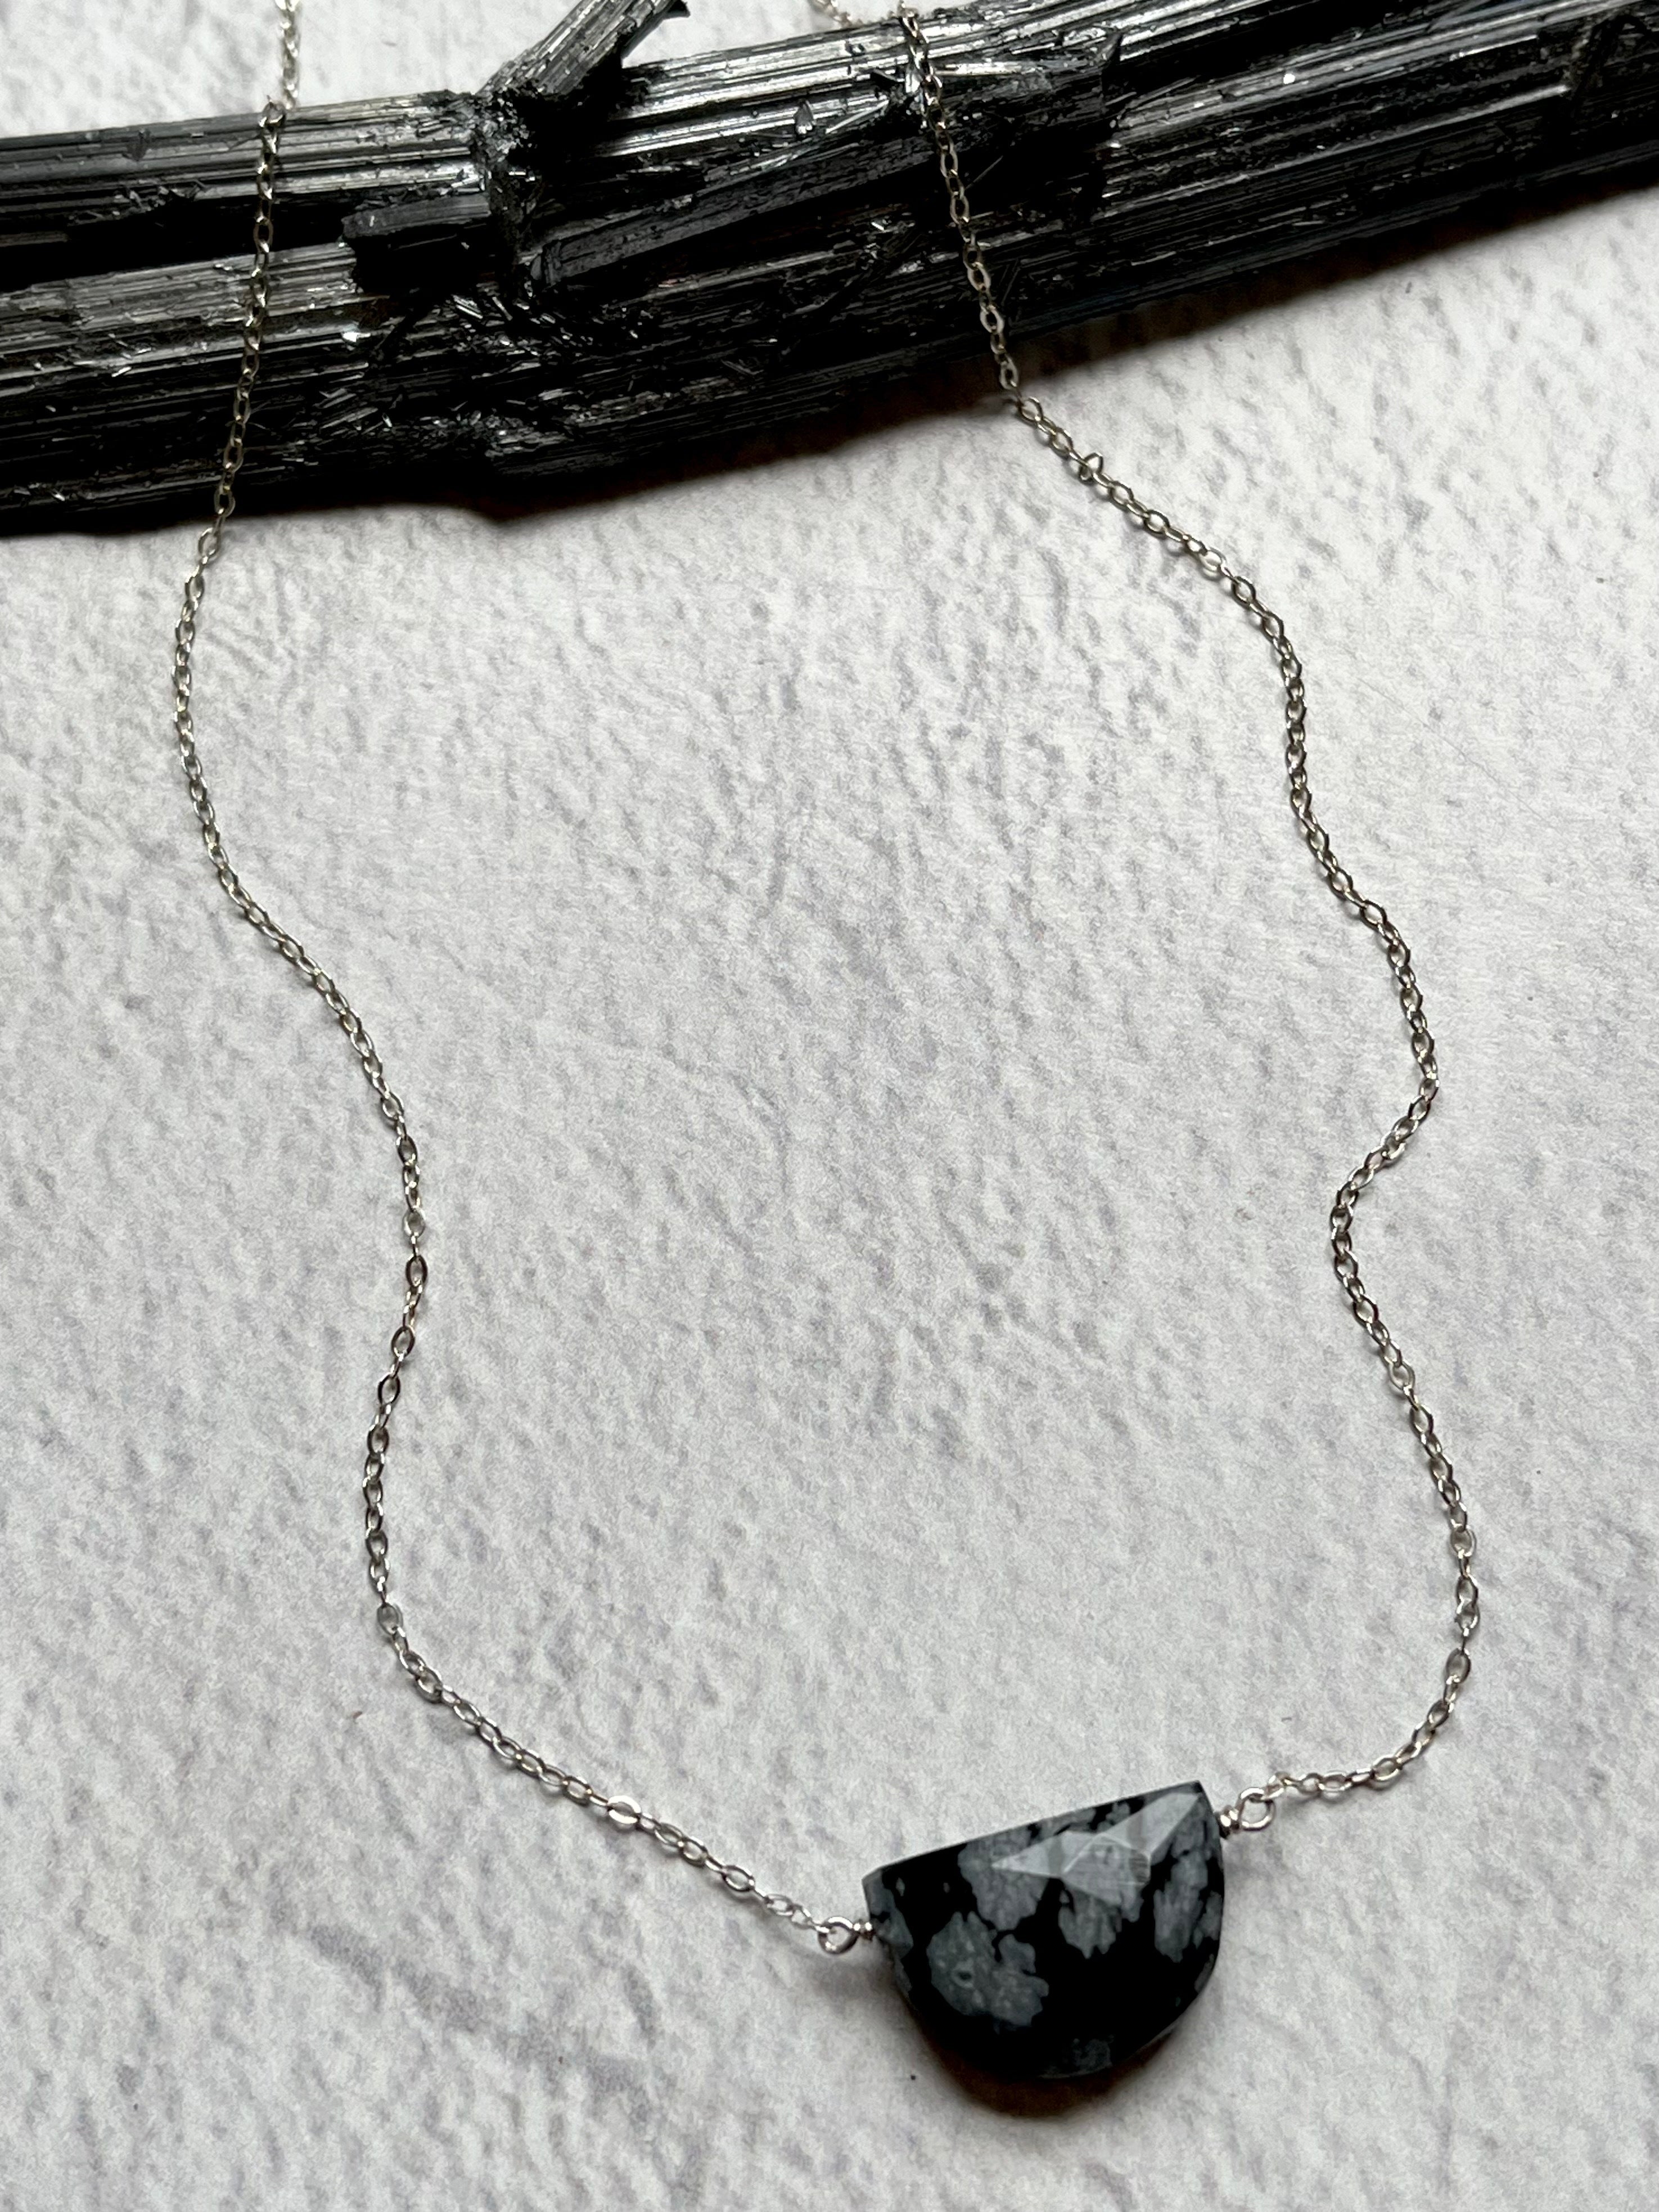 •STRAY• snowflake obsidian + silver necklace